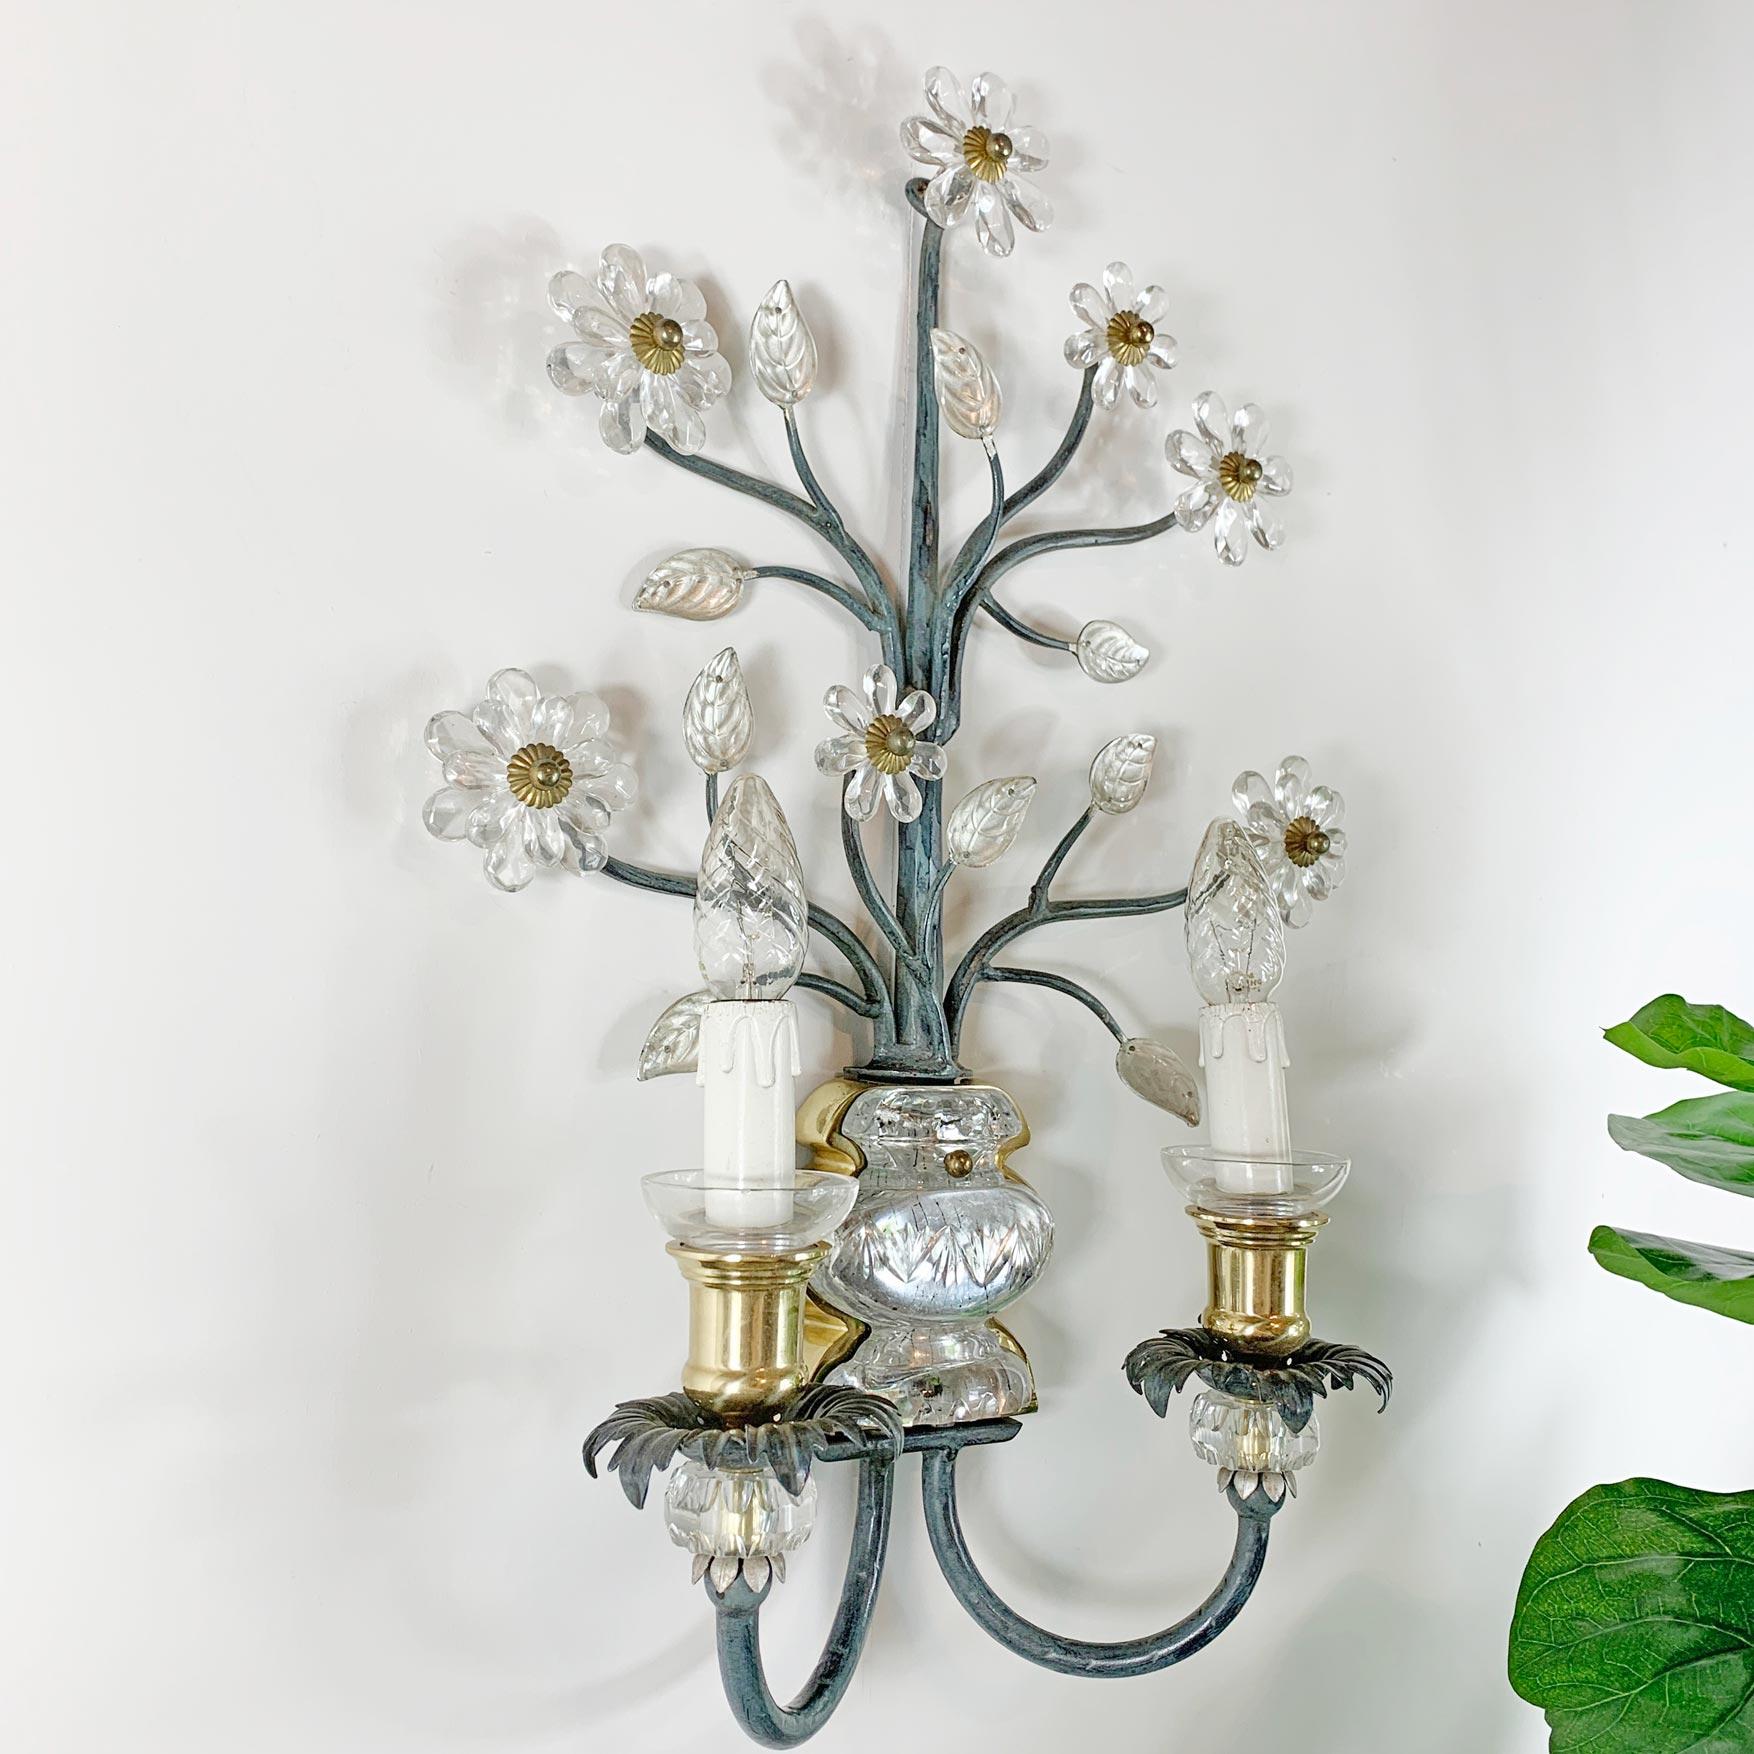 Banci Firenze Murano glass flower wall sconce
Italy circa 1970/80s

This Beautiful Sconce Has Many Stems Reaching Out To Murano Glass Flowers And Murano Glass Leaves With Gilt Leaf Underlay
There Is A Central Brass Urn With A Murano Glass Urn